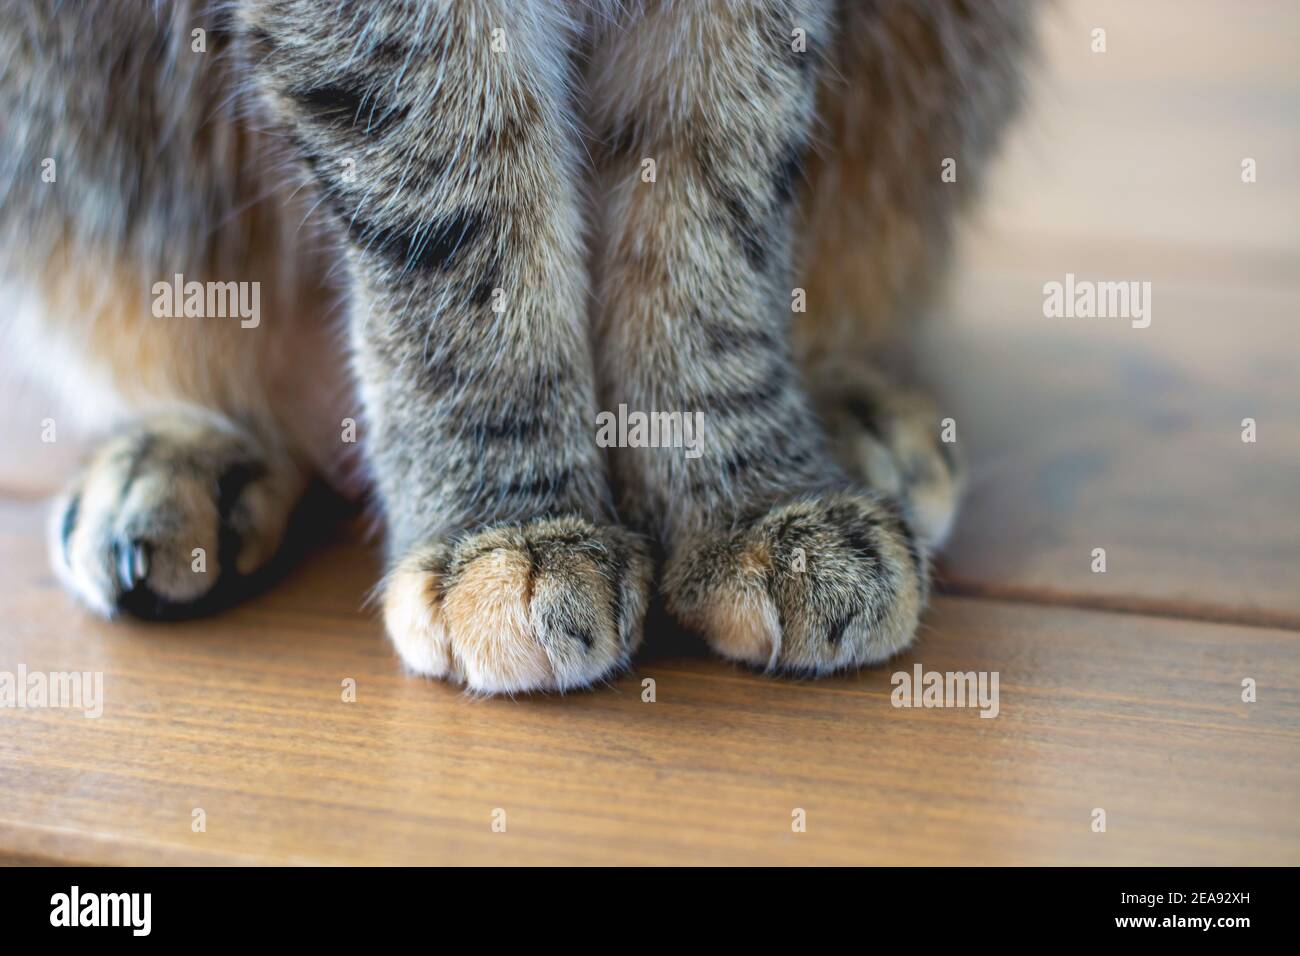 Shot of cute soft cat paws while sitting on table. Stock Photo